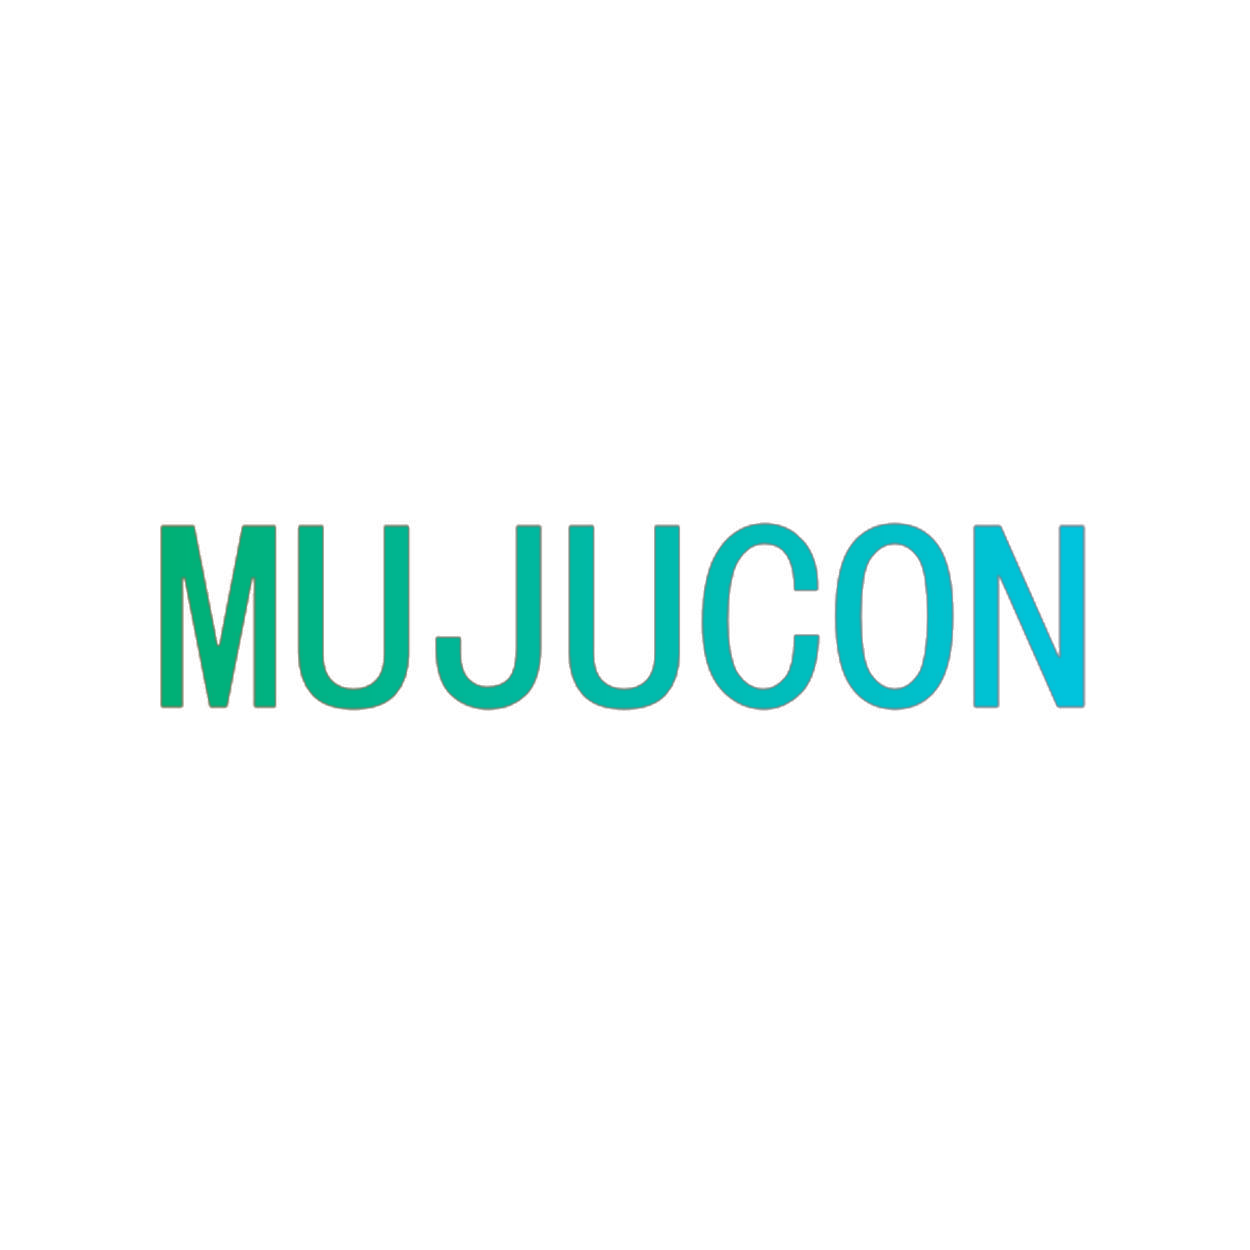 MUJUCON